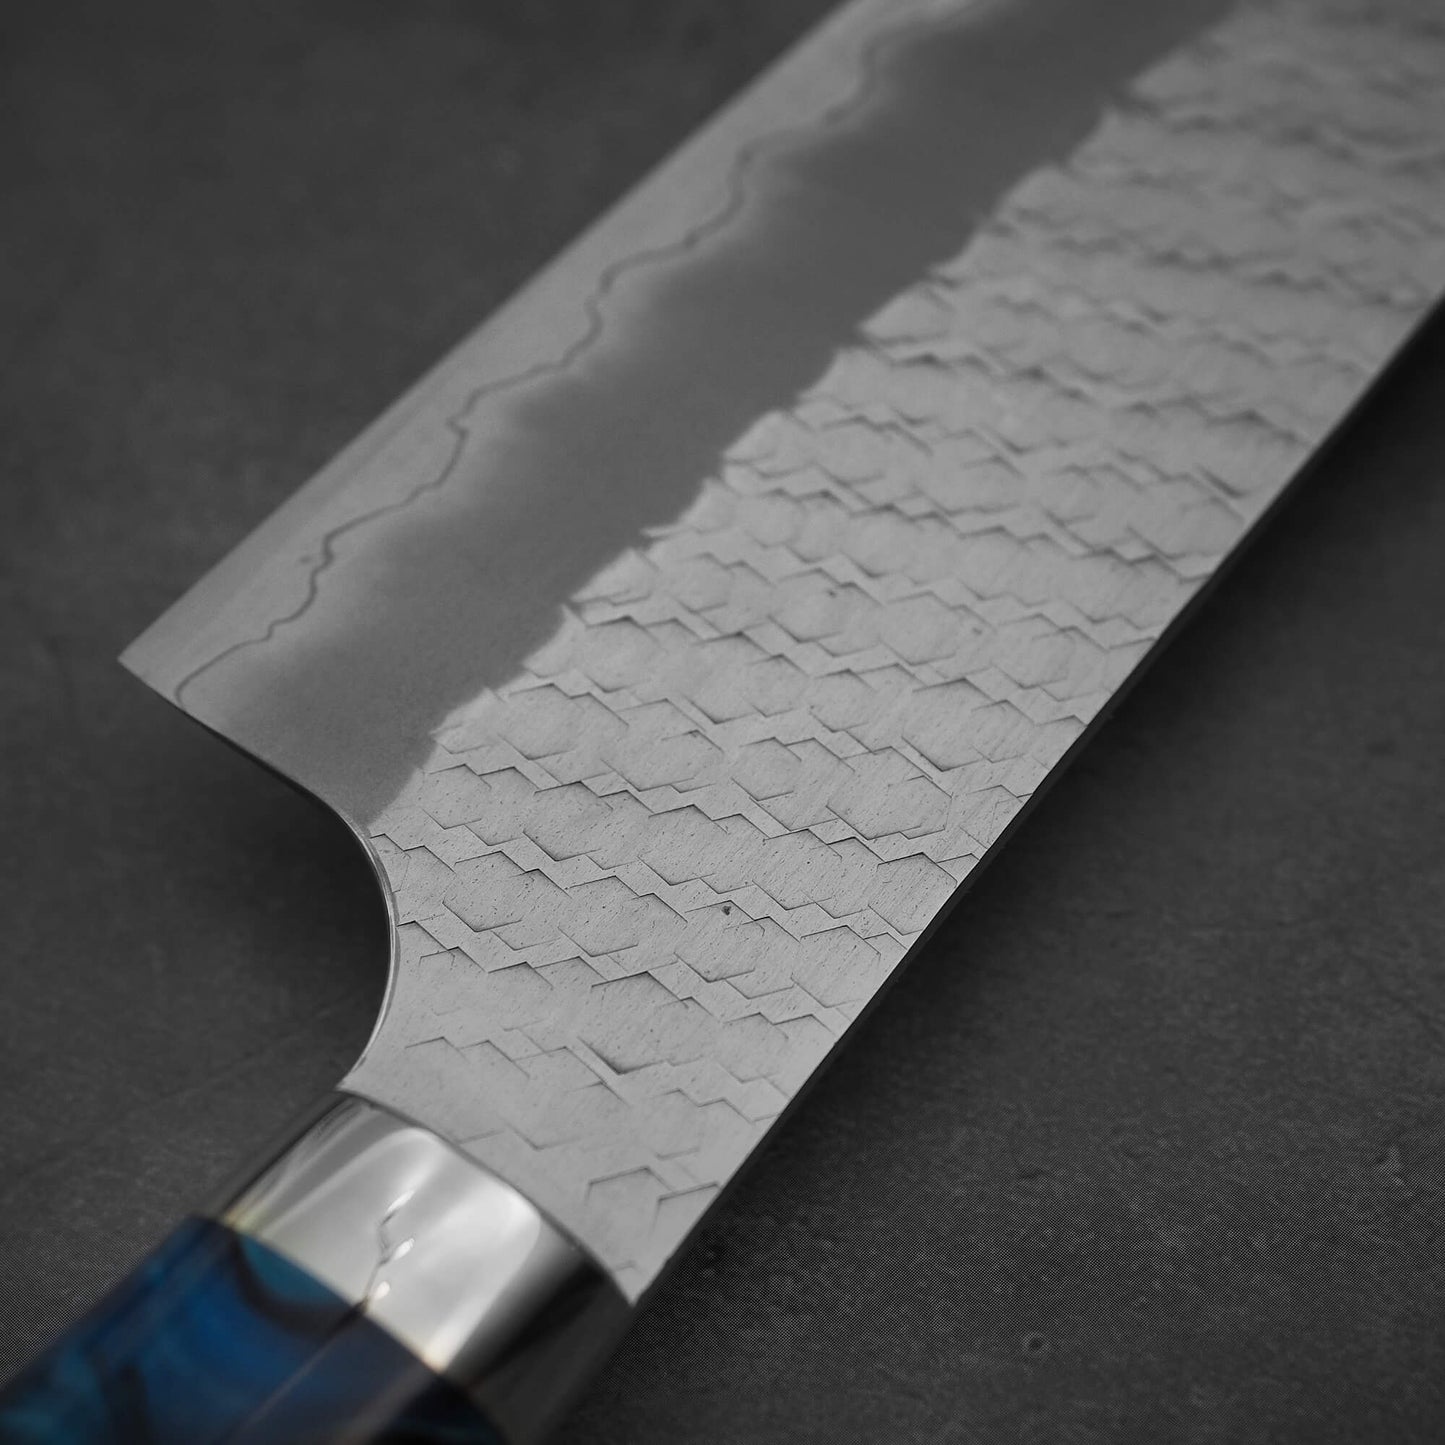 Close up view of the back side of 210mm Nigara tsuchime SG2 gyuto knife with blue handle